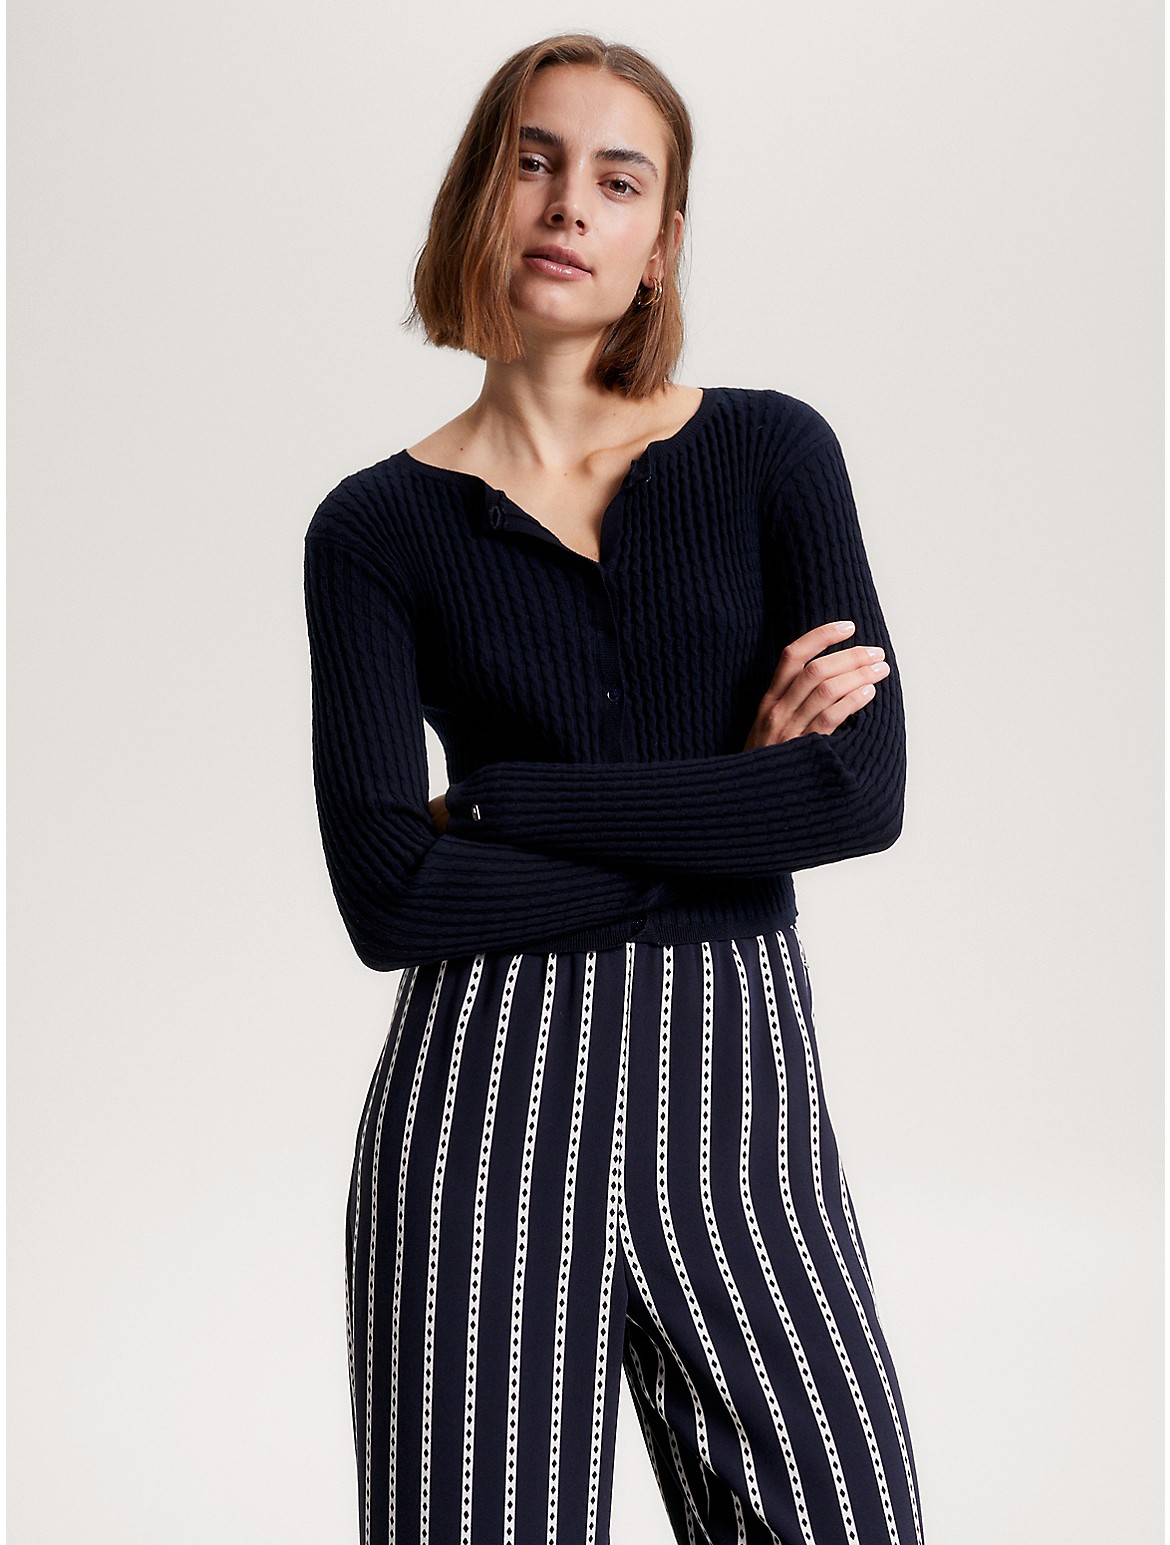 Tommy Hilfiger Women's Cable Knit Cropped Sweater